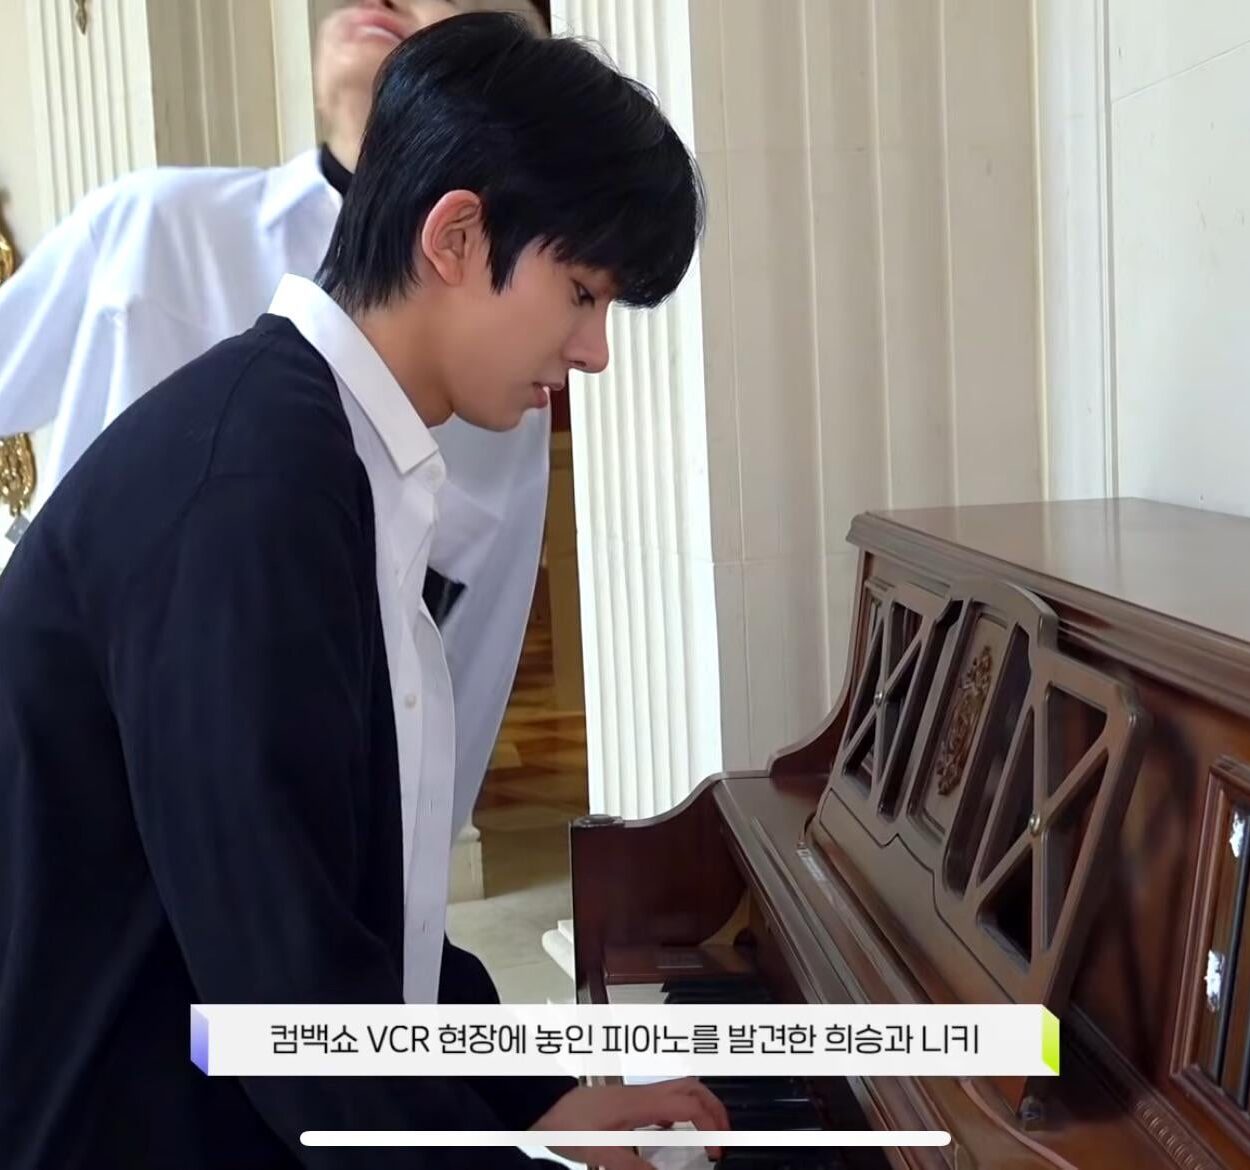 Where is this piano?